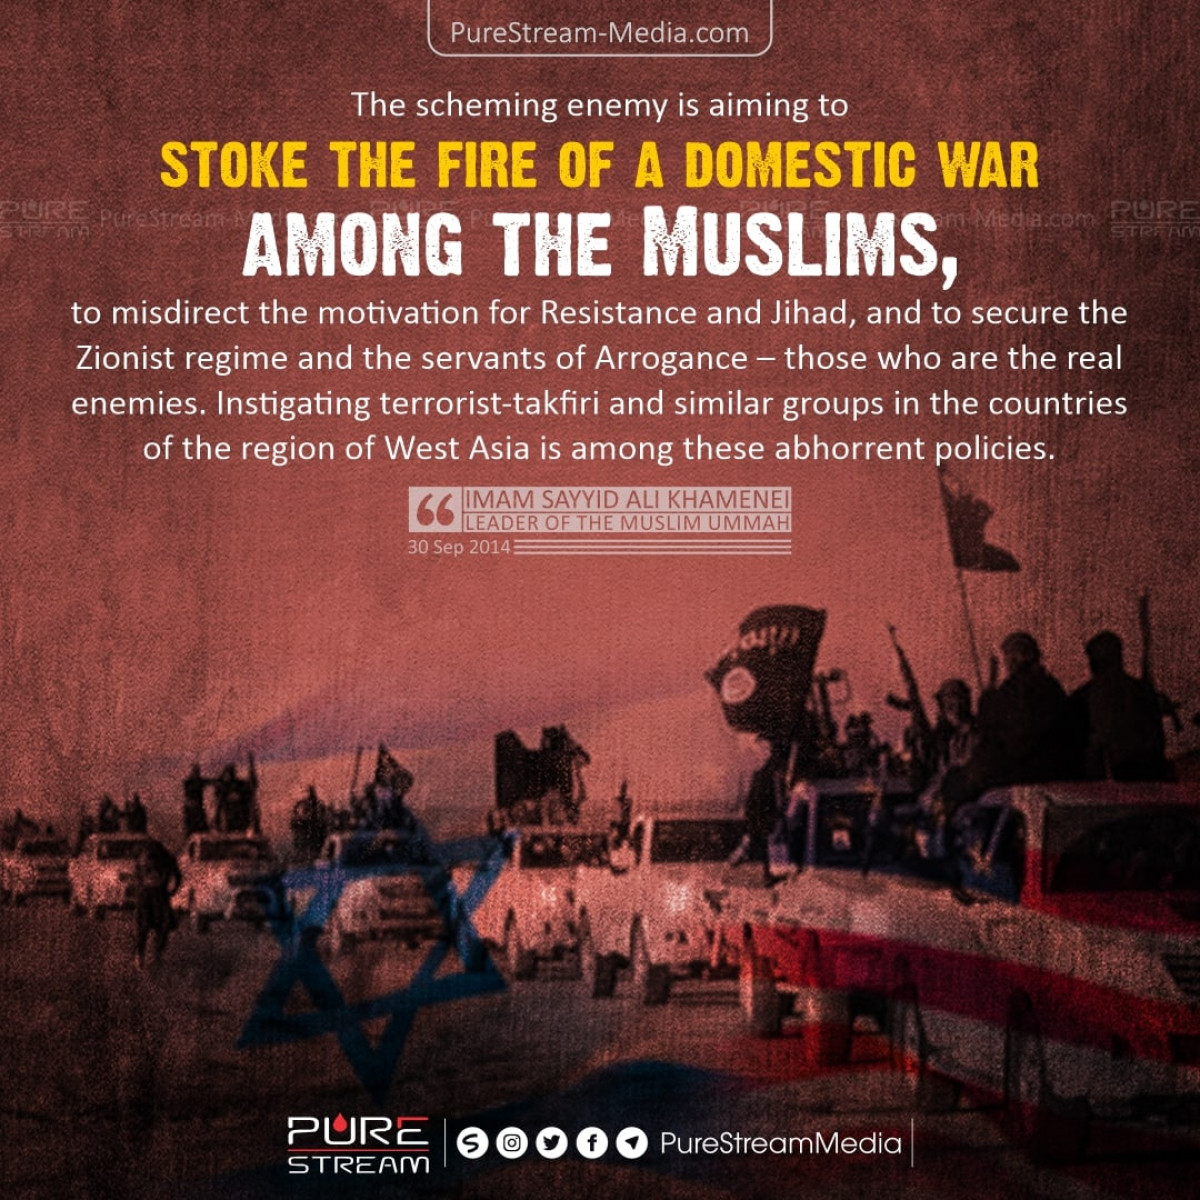 The scheming enemy is aiming to stoke the fire of a domestic war among the Muslims